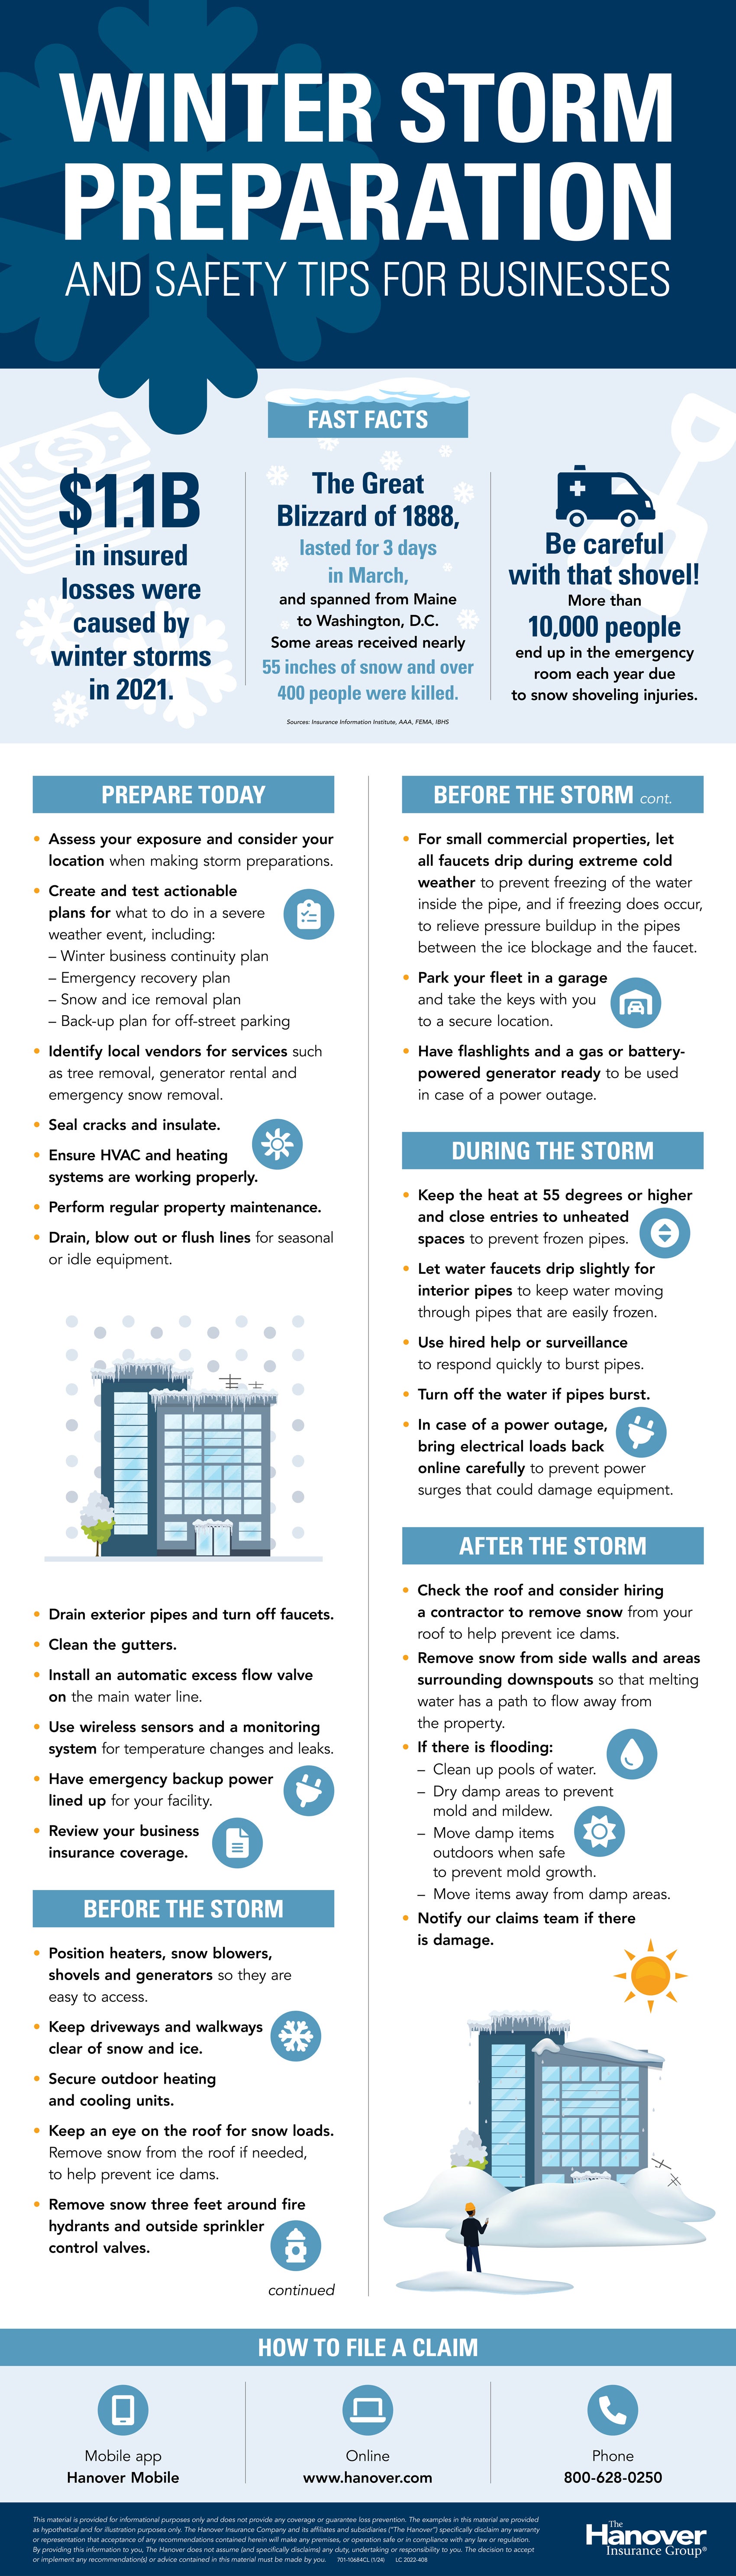 Winter storm preparation and safety tips infographic